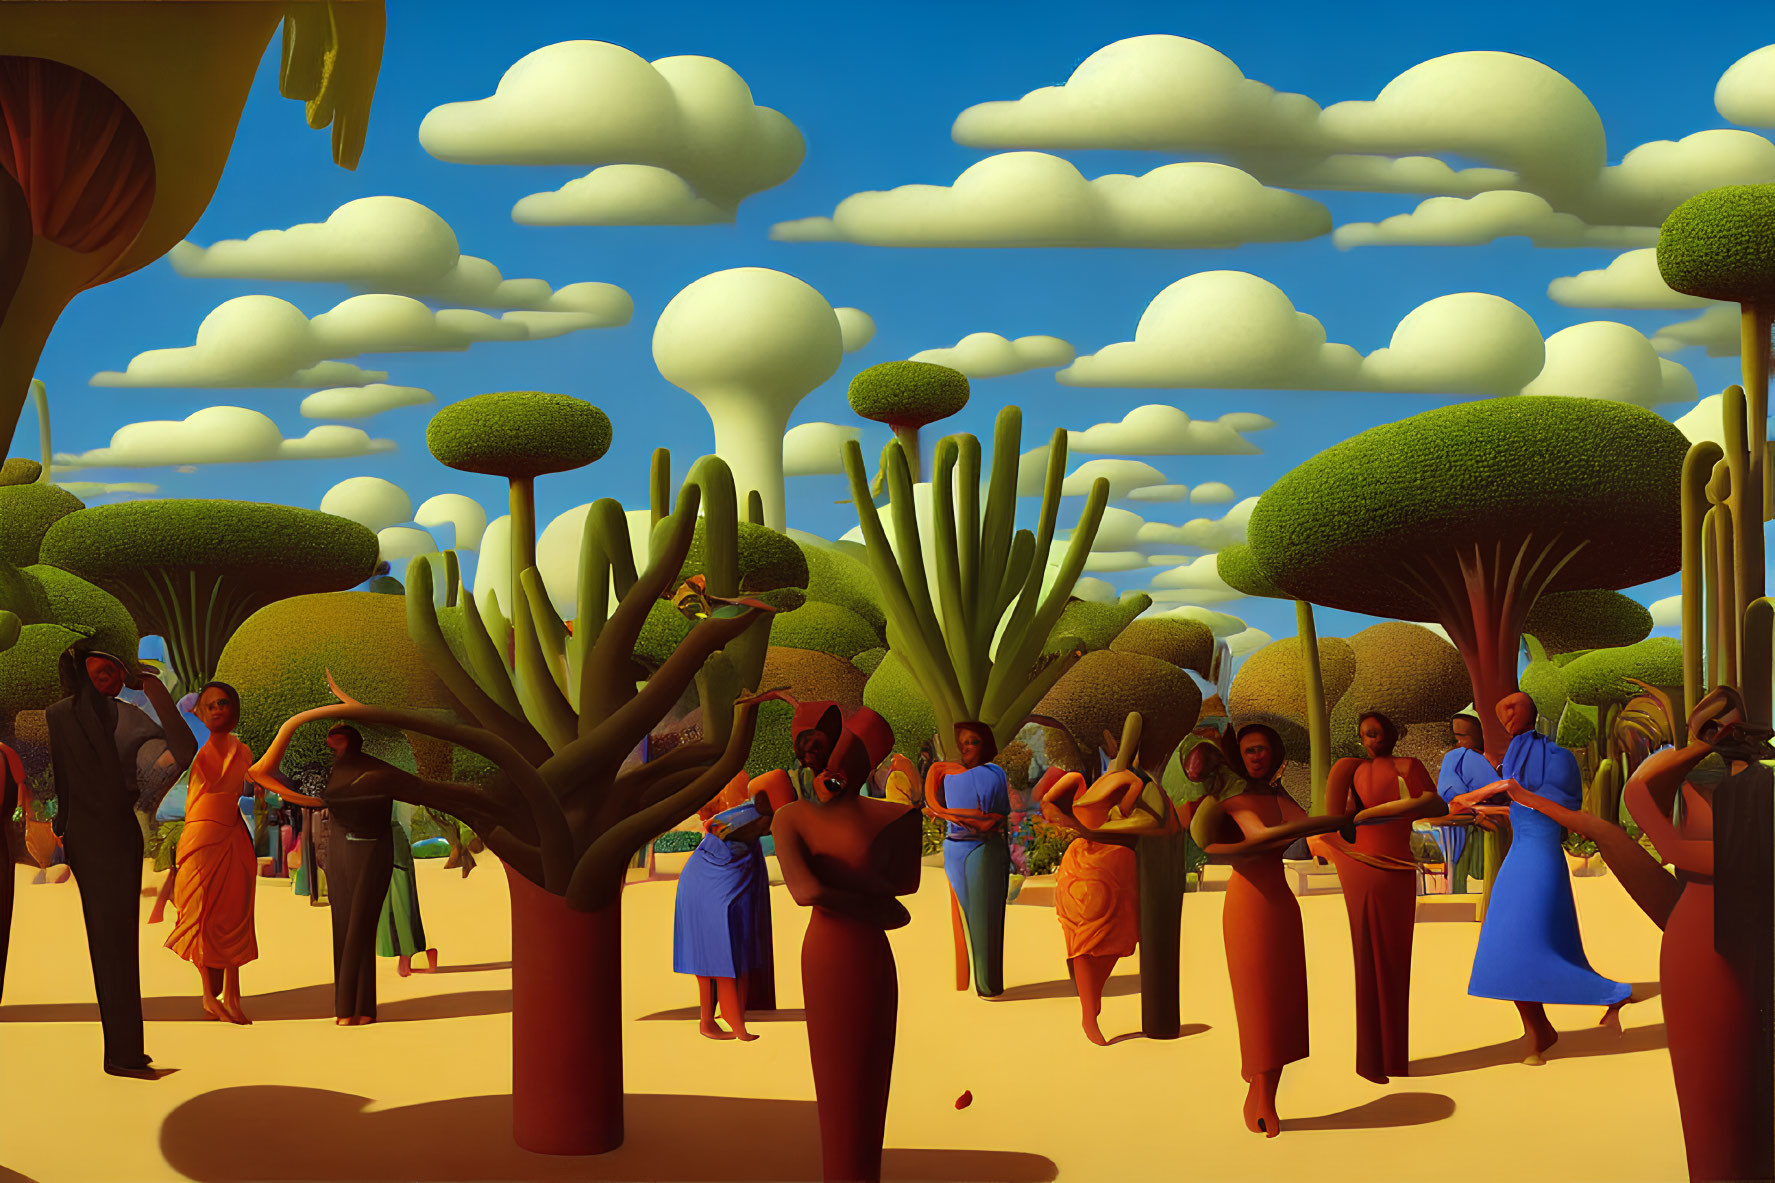 Colorful surreal landscape with stylized trees, clouds, and people in vibrant attire.